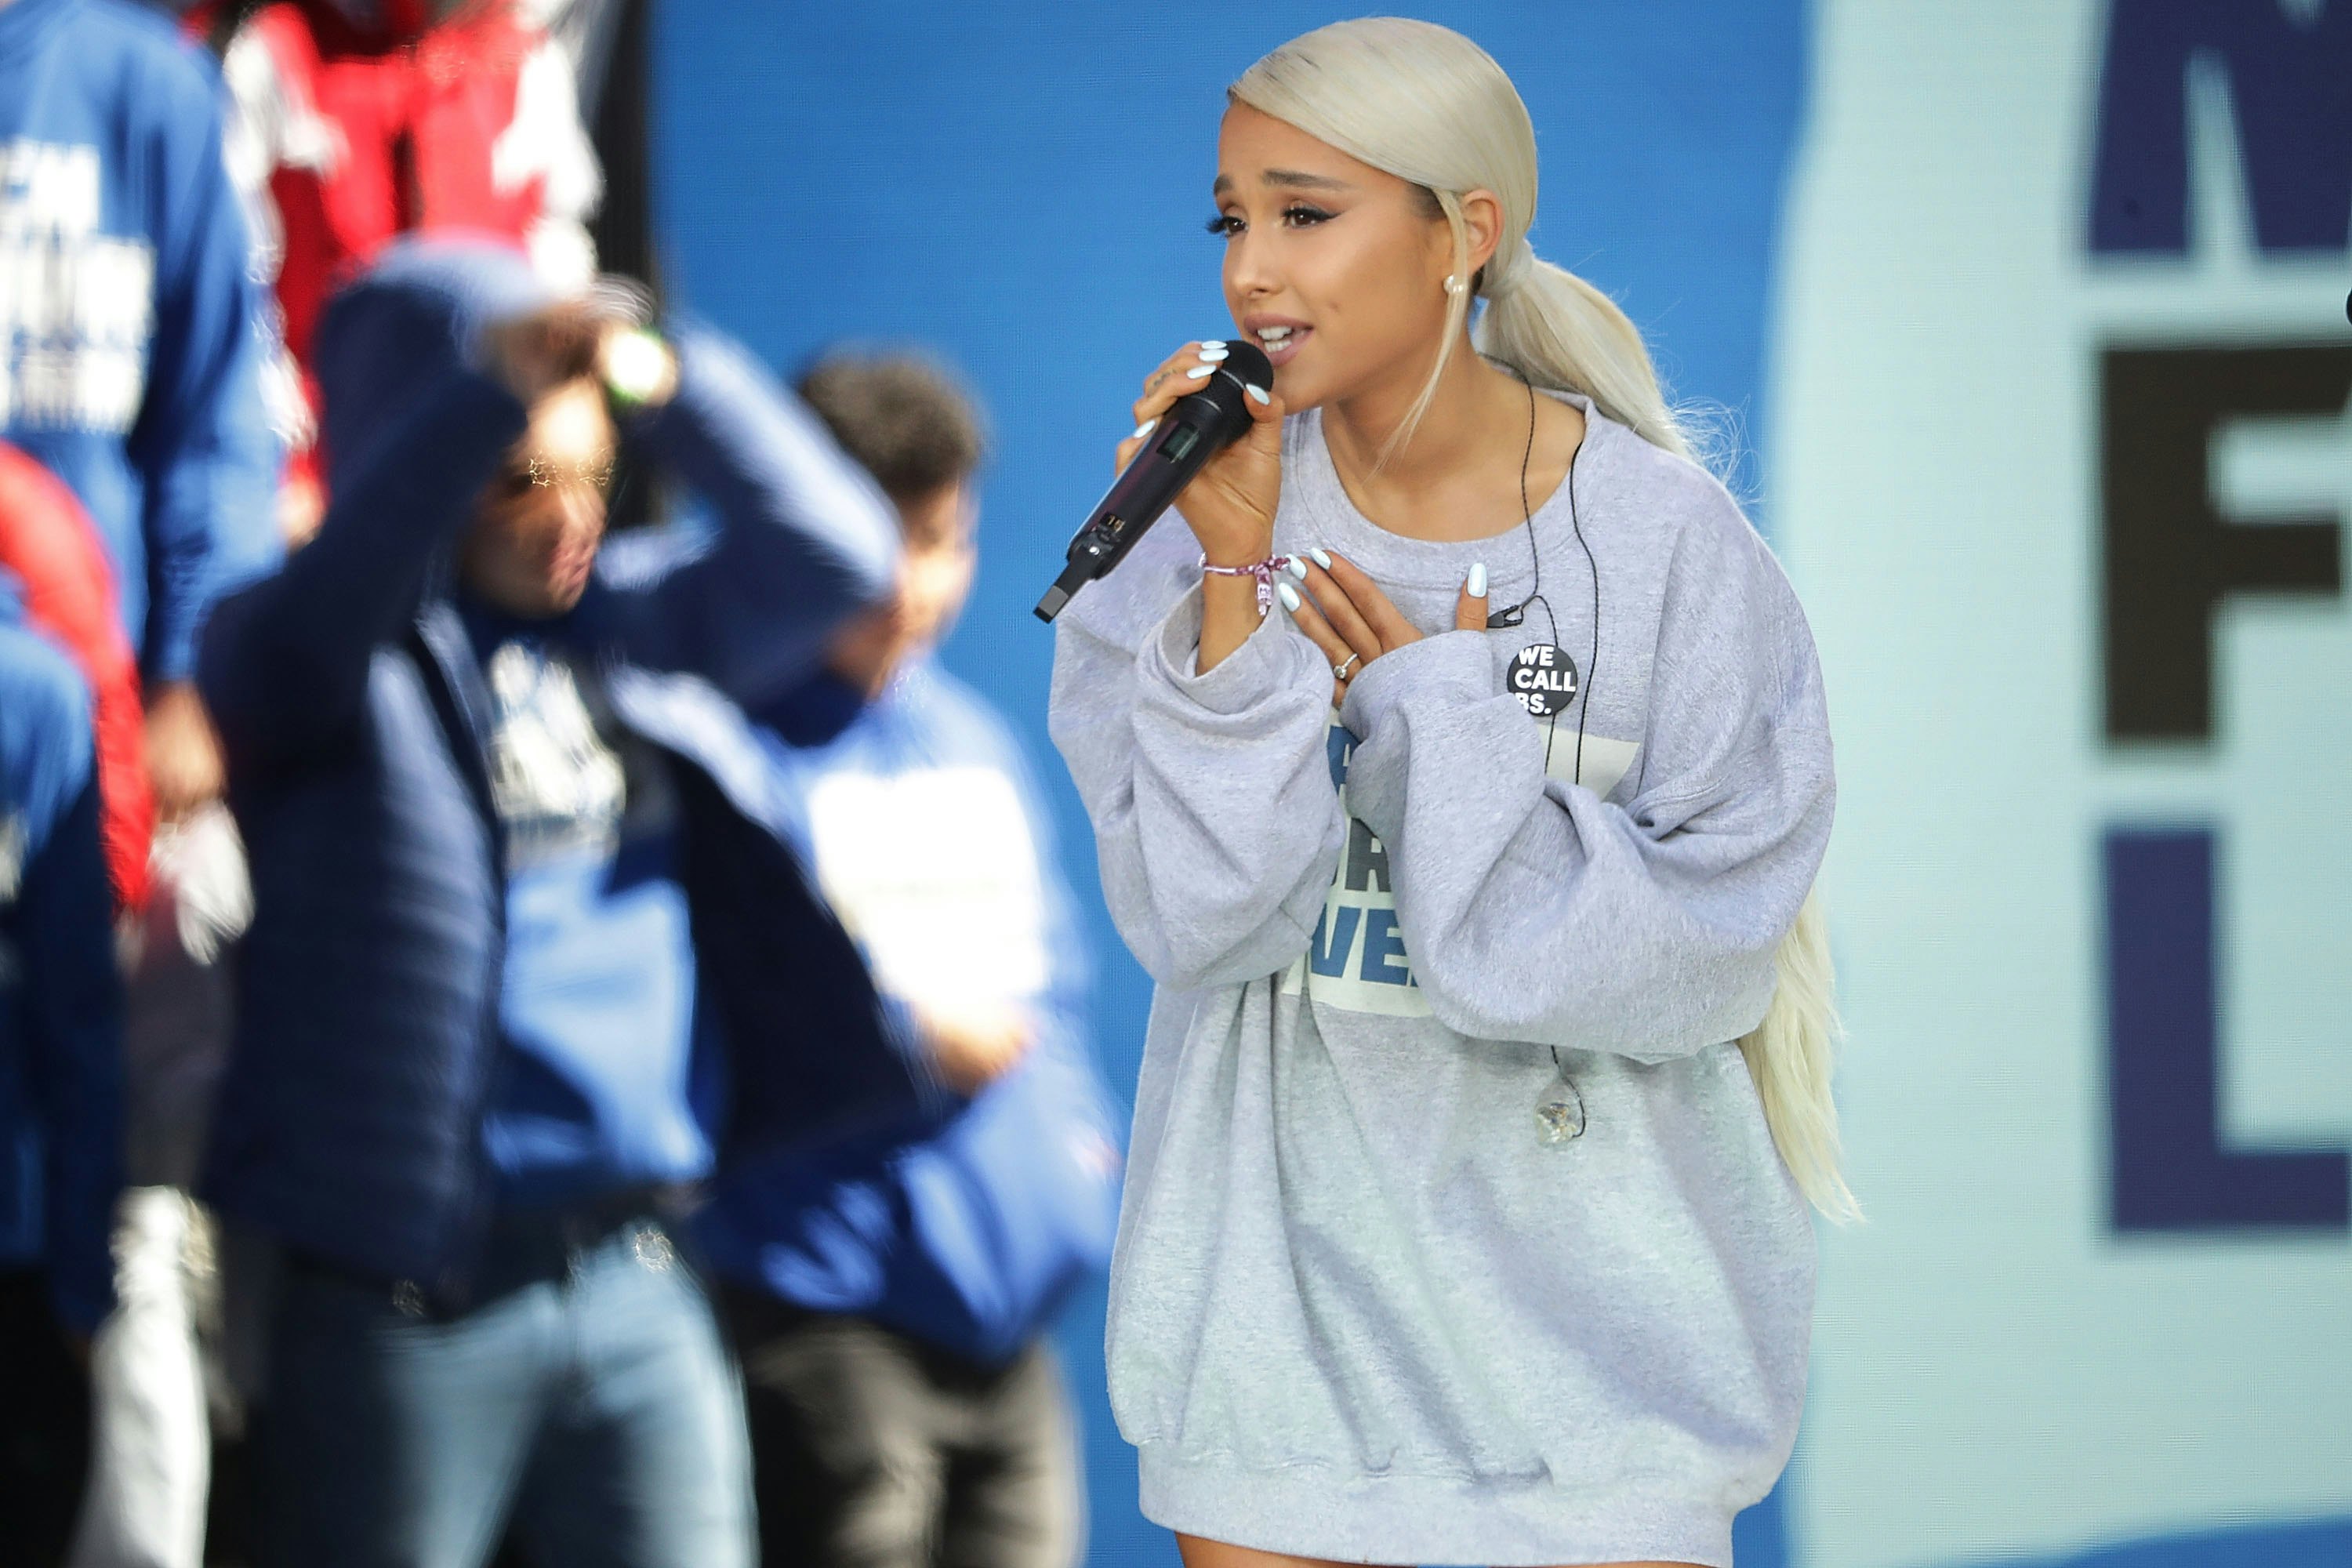 Ariana Grande Is Registering Voters On Her Sweetener Tour To